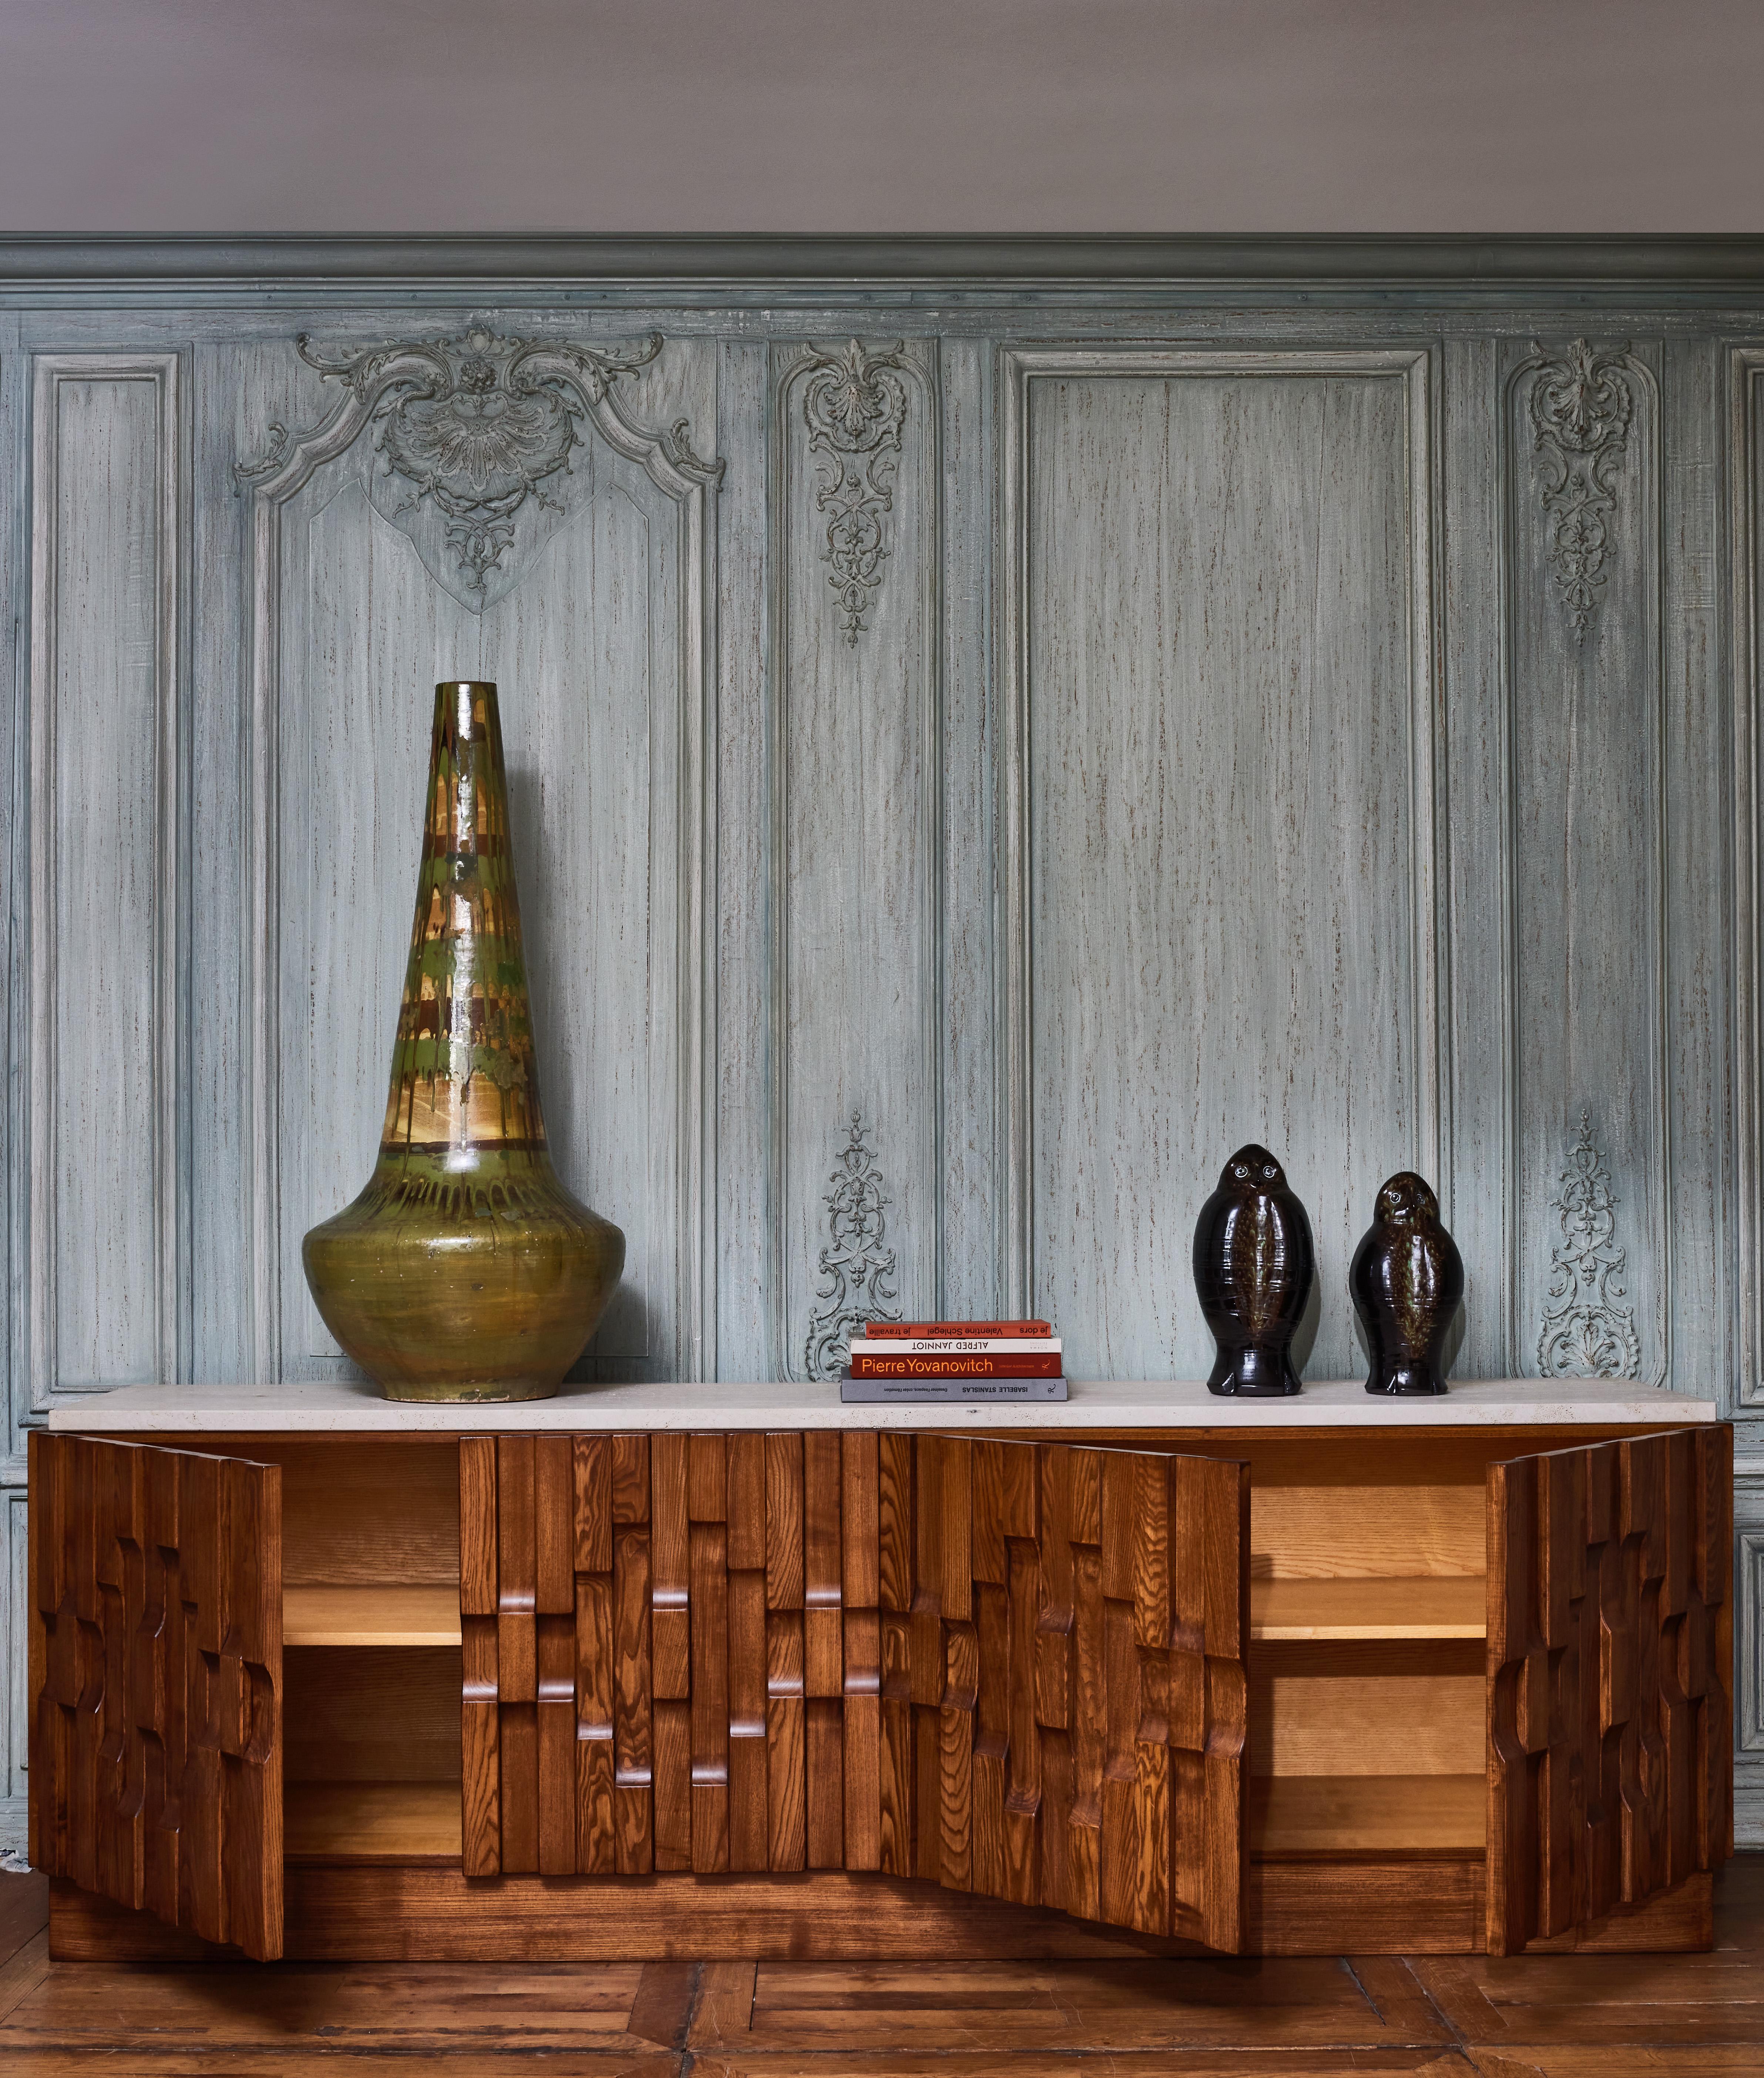 4 doors sideboard in sculpted wood and travertine stone top.
Creation by Studio Glustin.